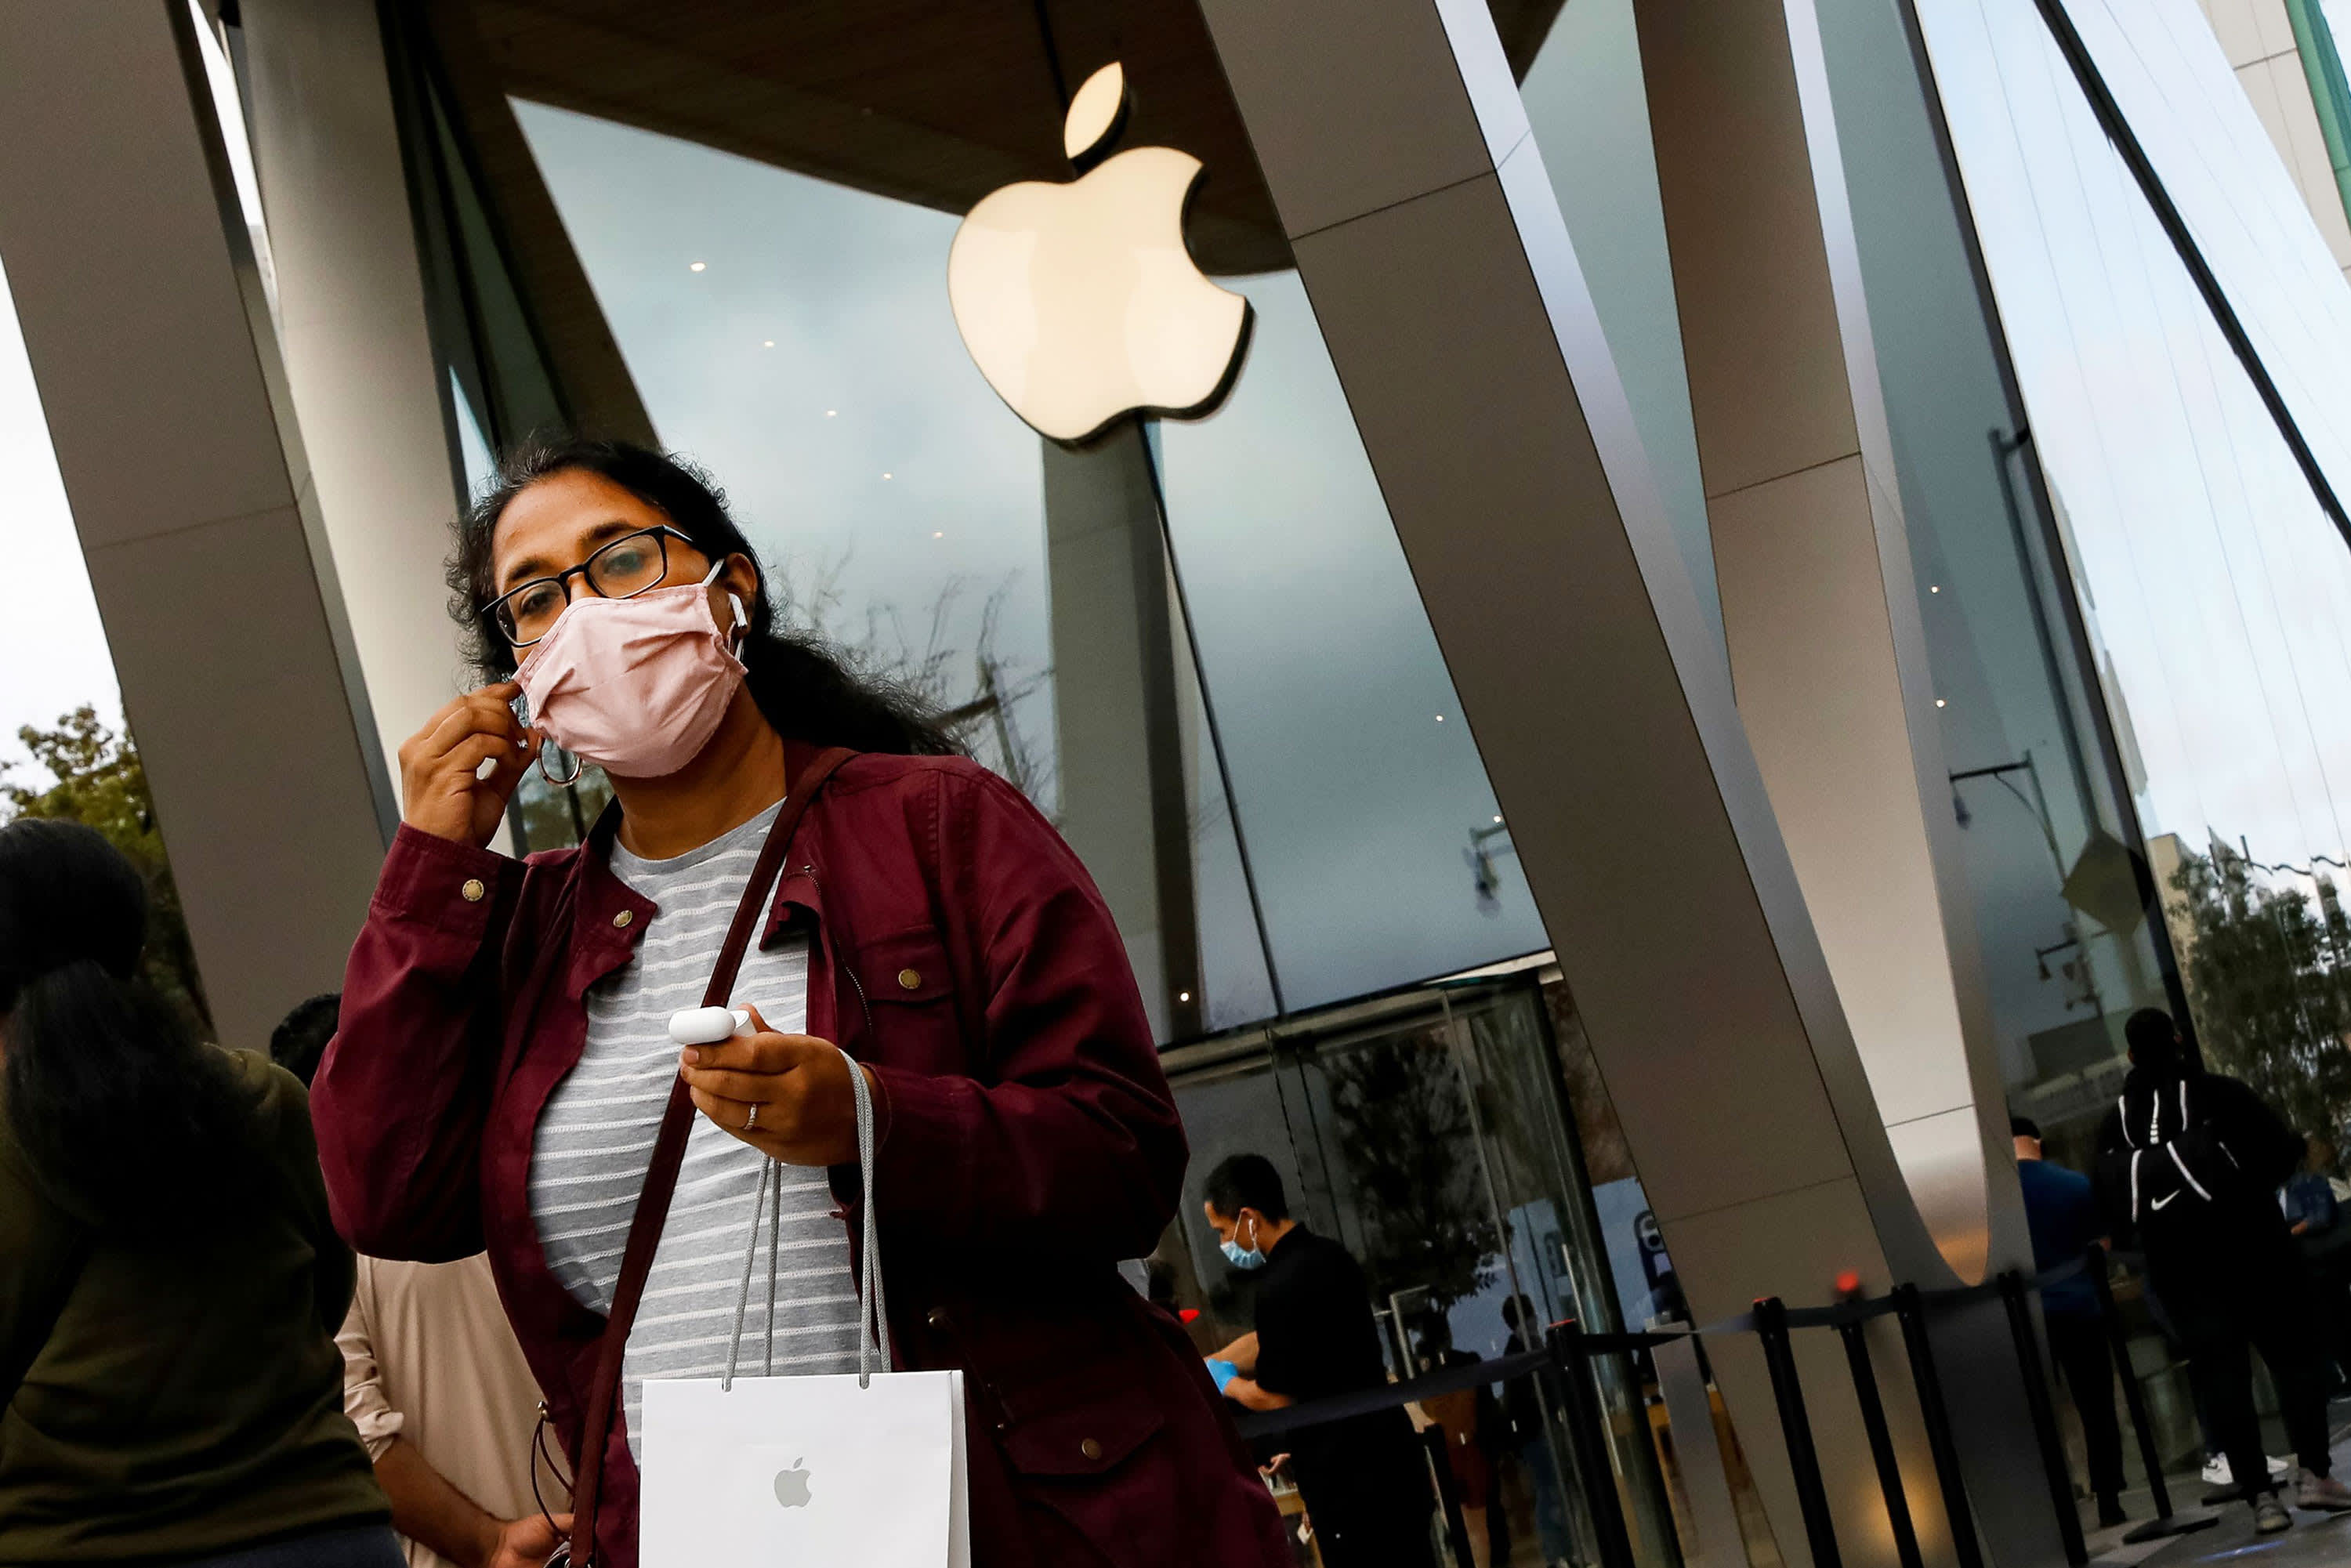 Apple App Store customers spent $ 540 million on New Year’s Day